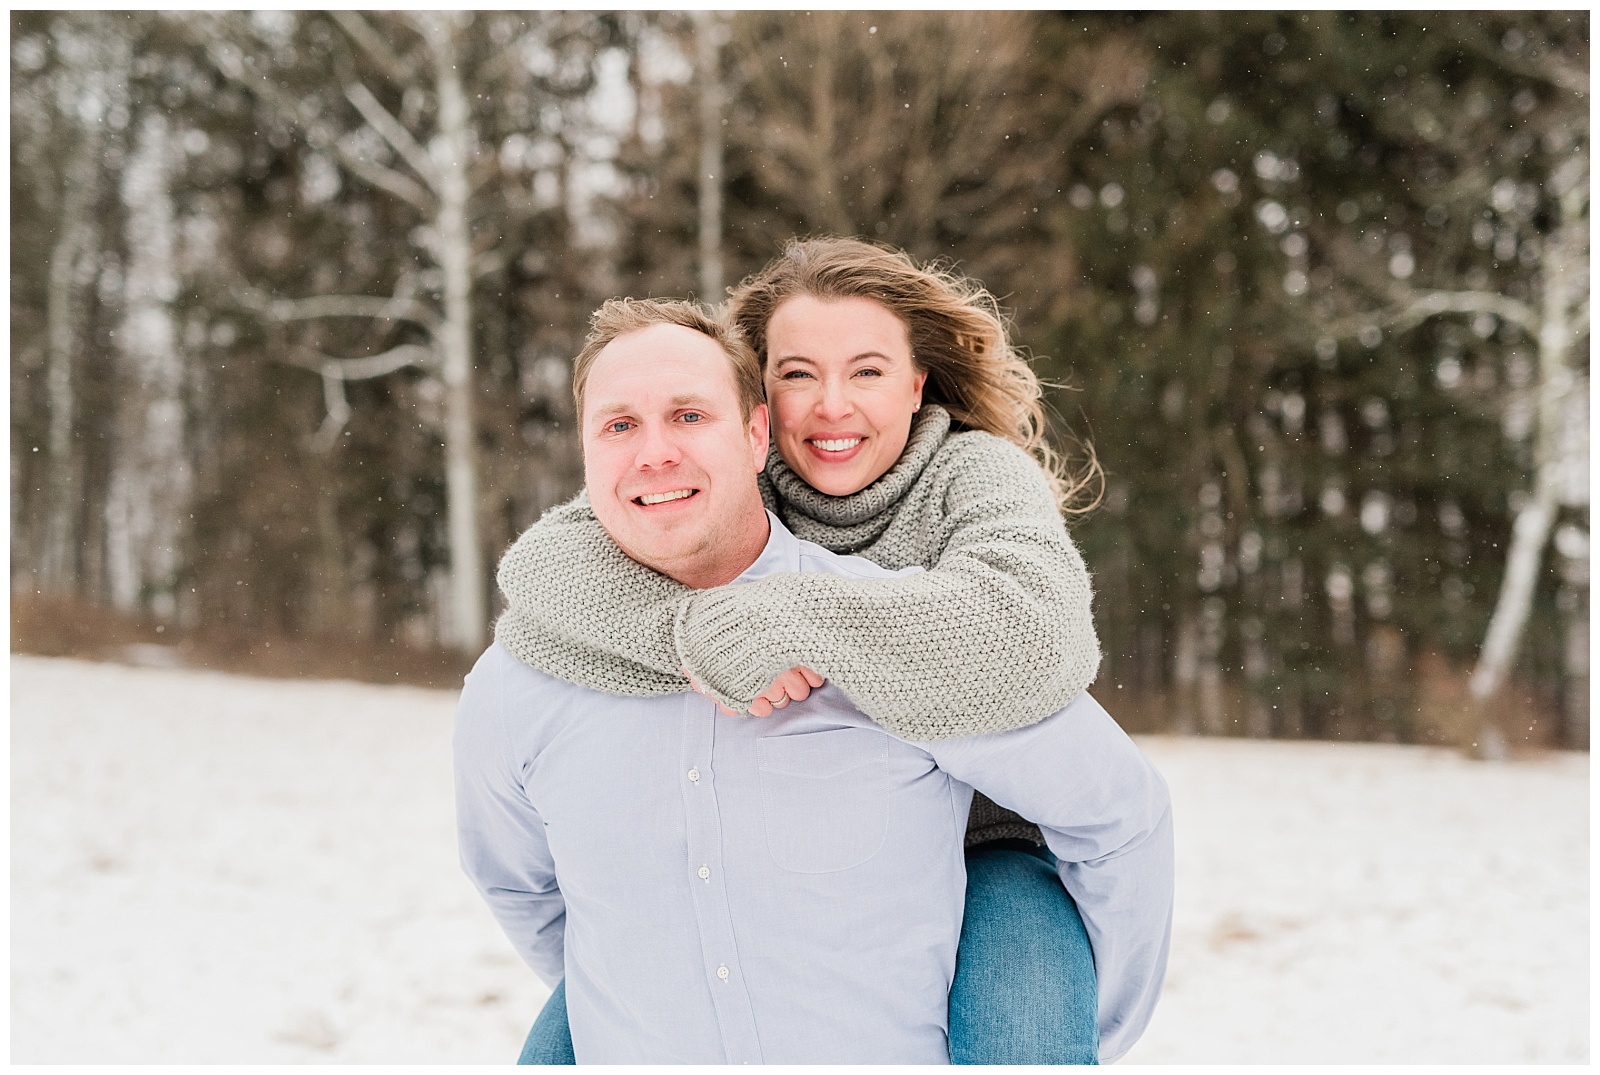 New Jersey Engagement Session, Snowy, Winter, Cozy, Session, Wedding Photographer, Cross Estate Gardens, Snow, Wintry, Light and Airy, Joyful